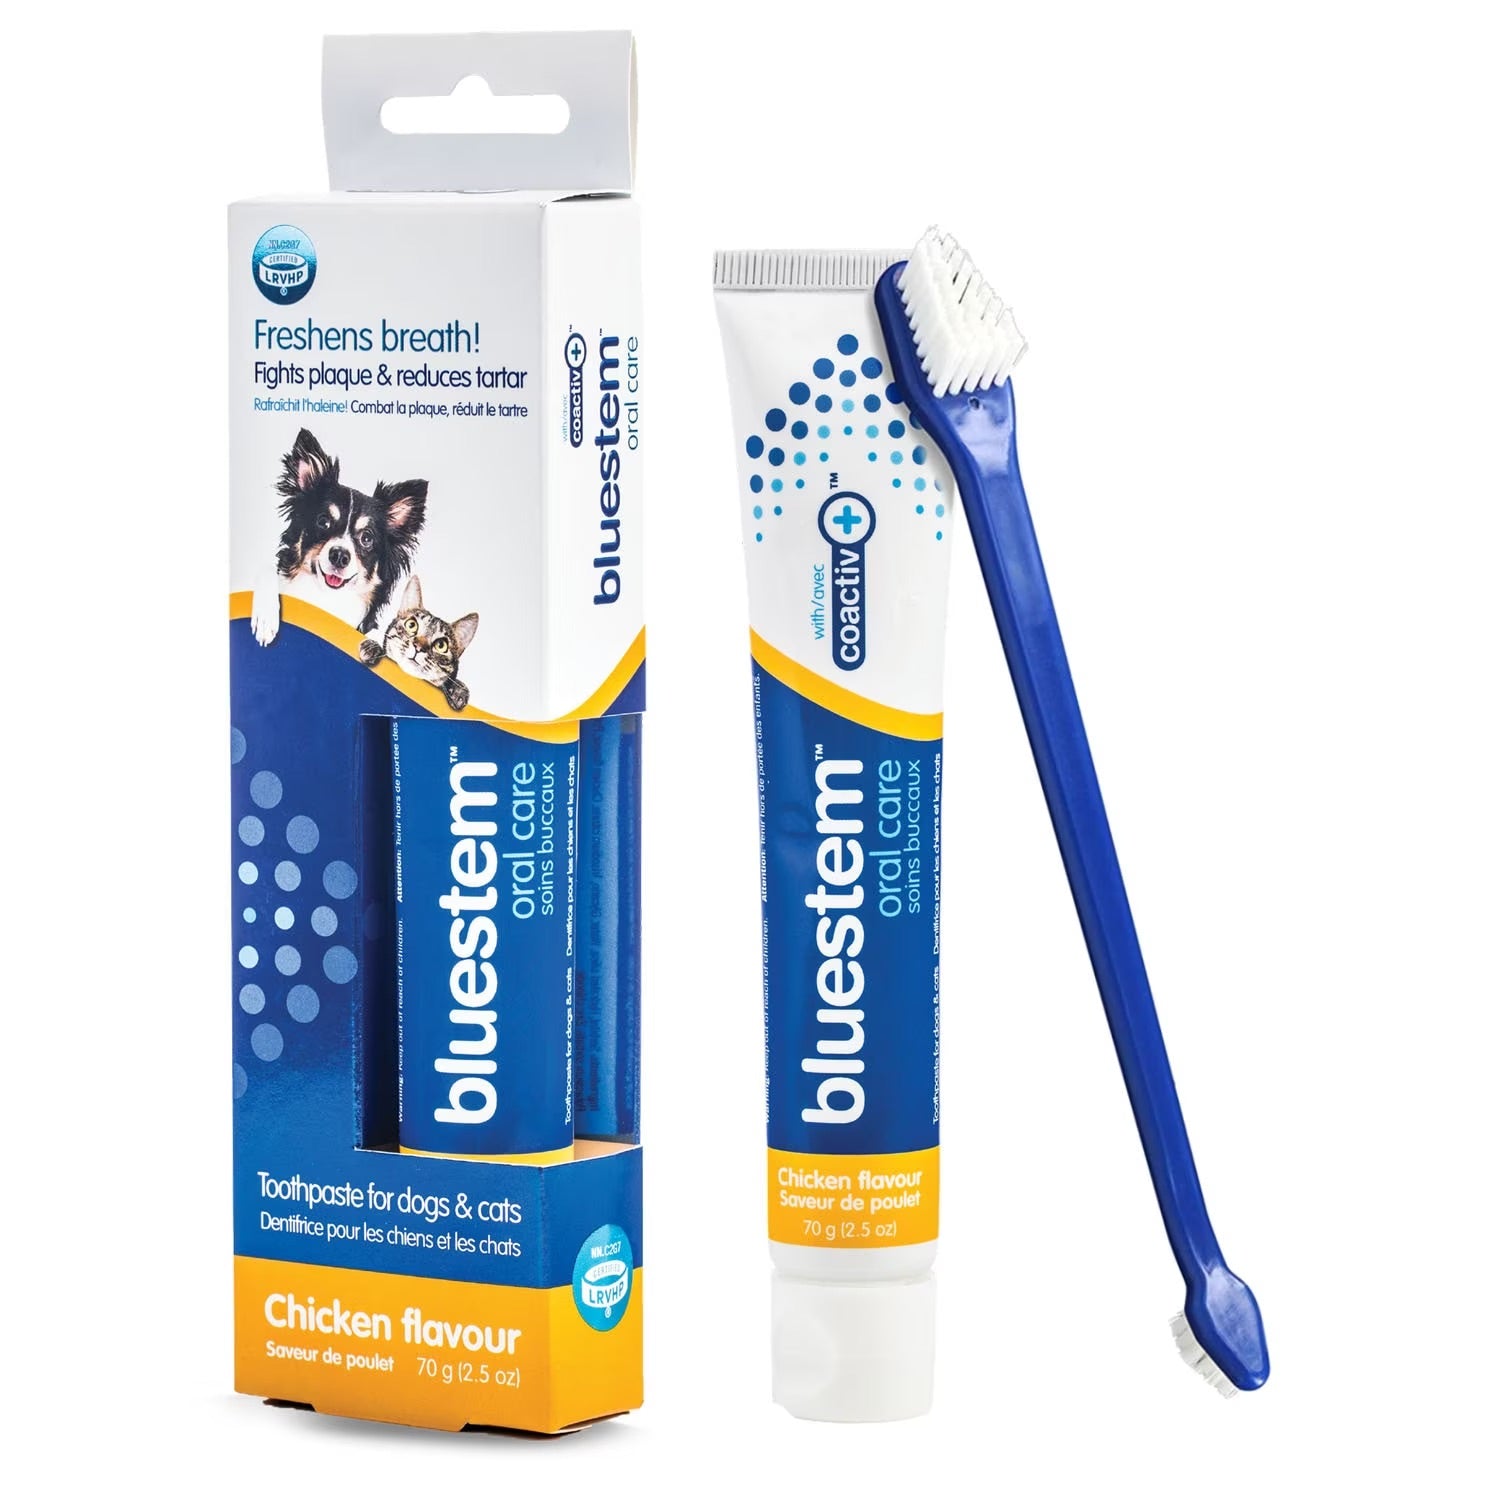 Bluestem Oral Care Toothpaste for Dogs & Cats, Chicken Flavour (2.5oz)